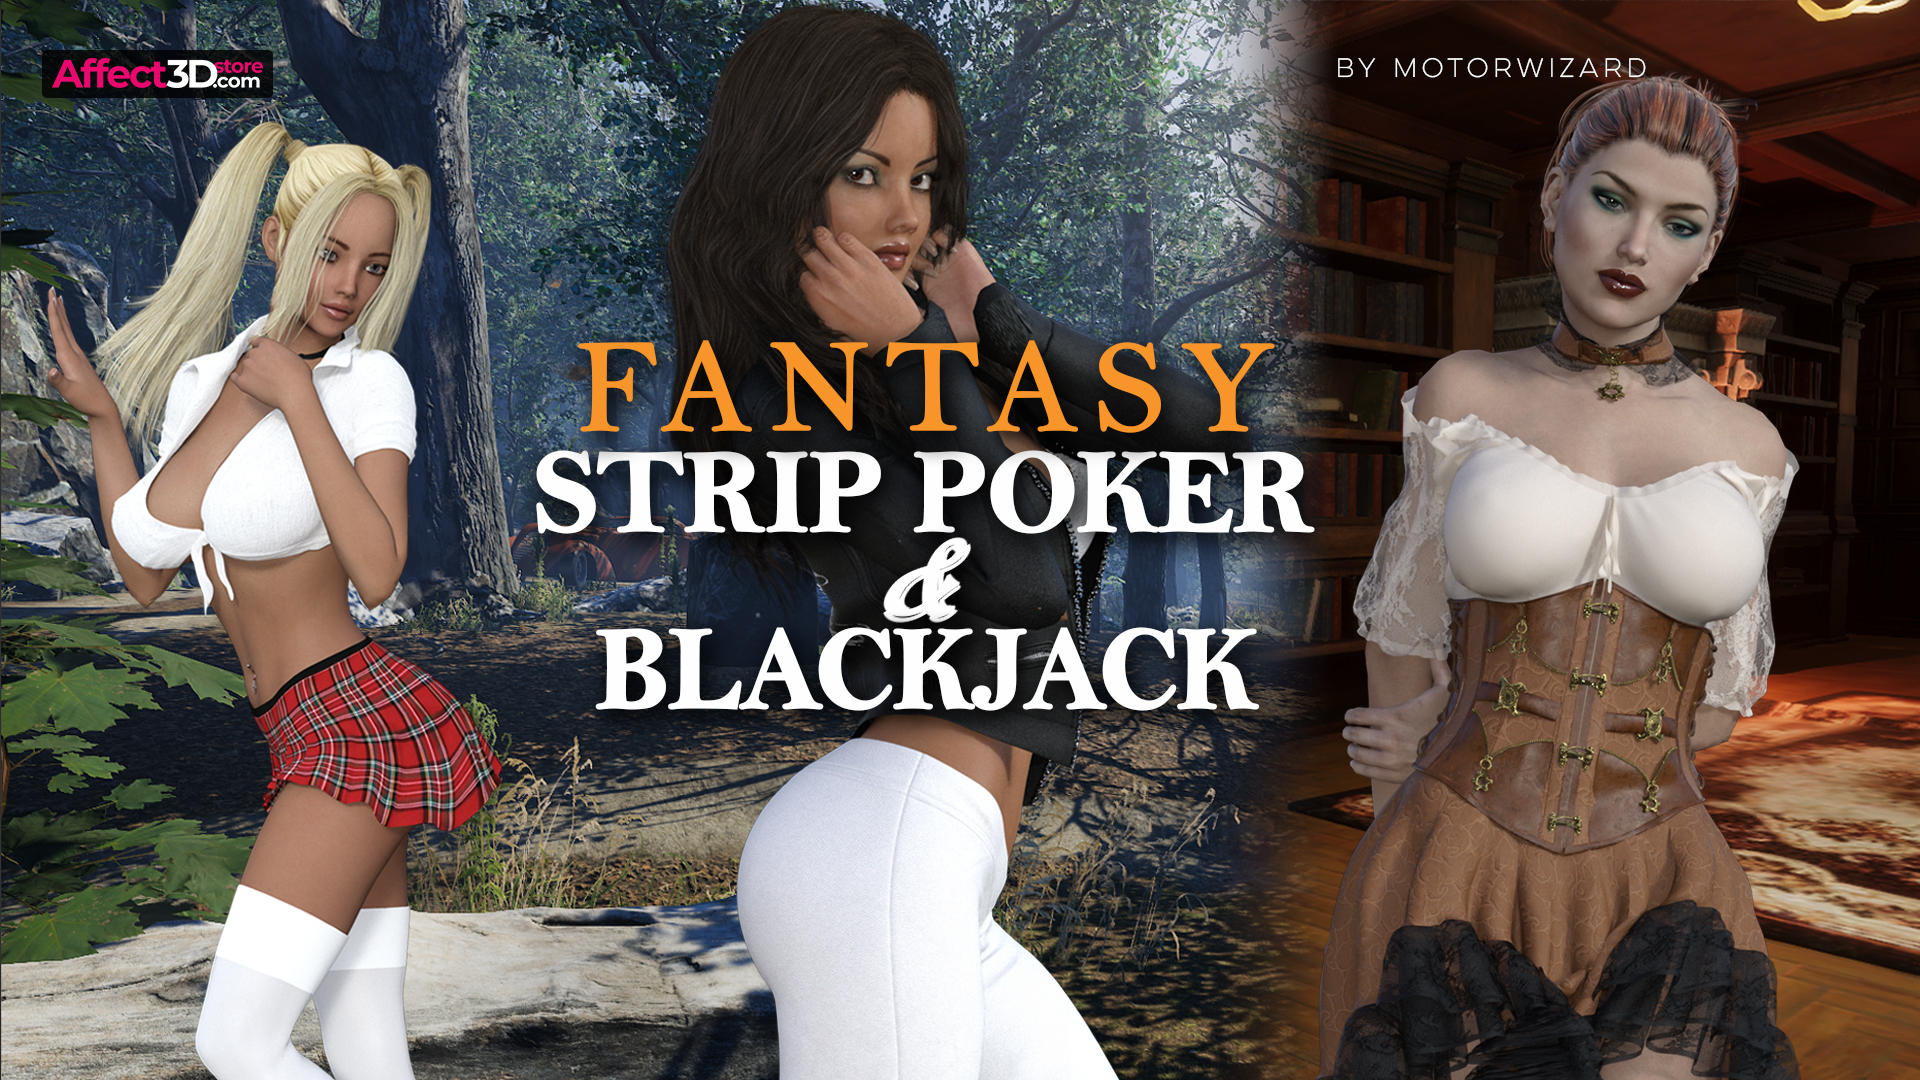 Motorwizard Releases Fantasy Strip Poker and Blackjack Adult Game! picture